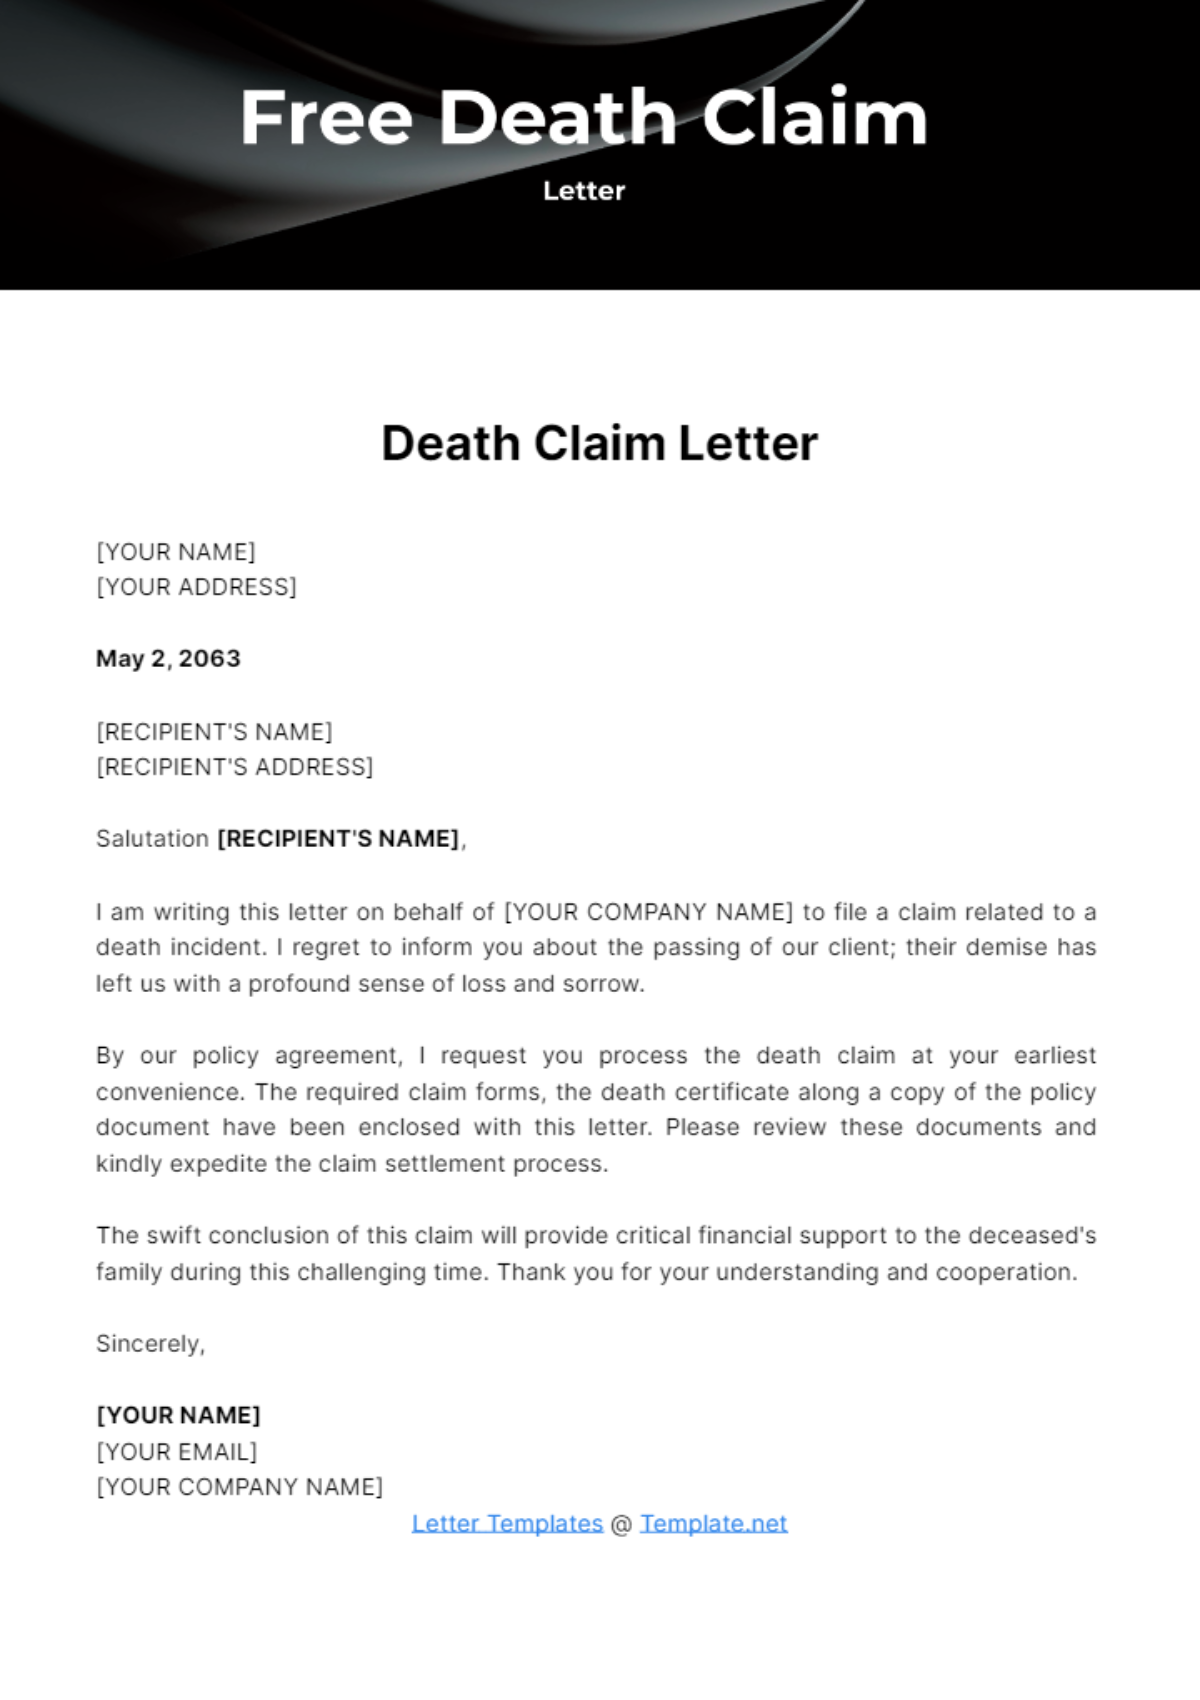 Death Claim Letter Template